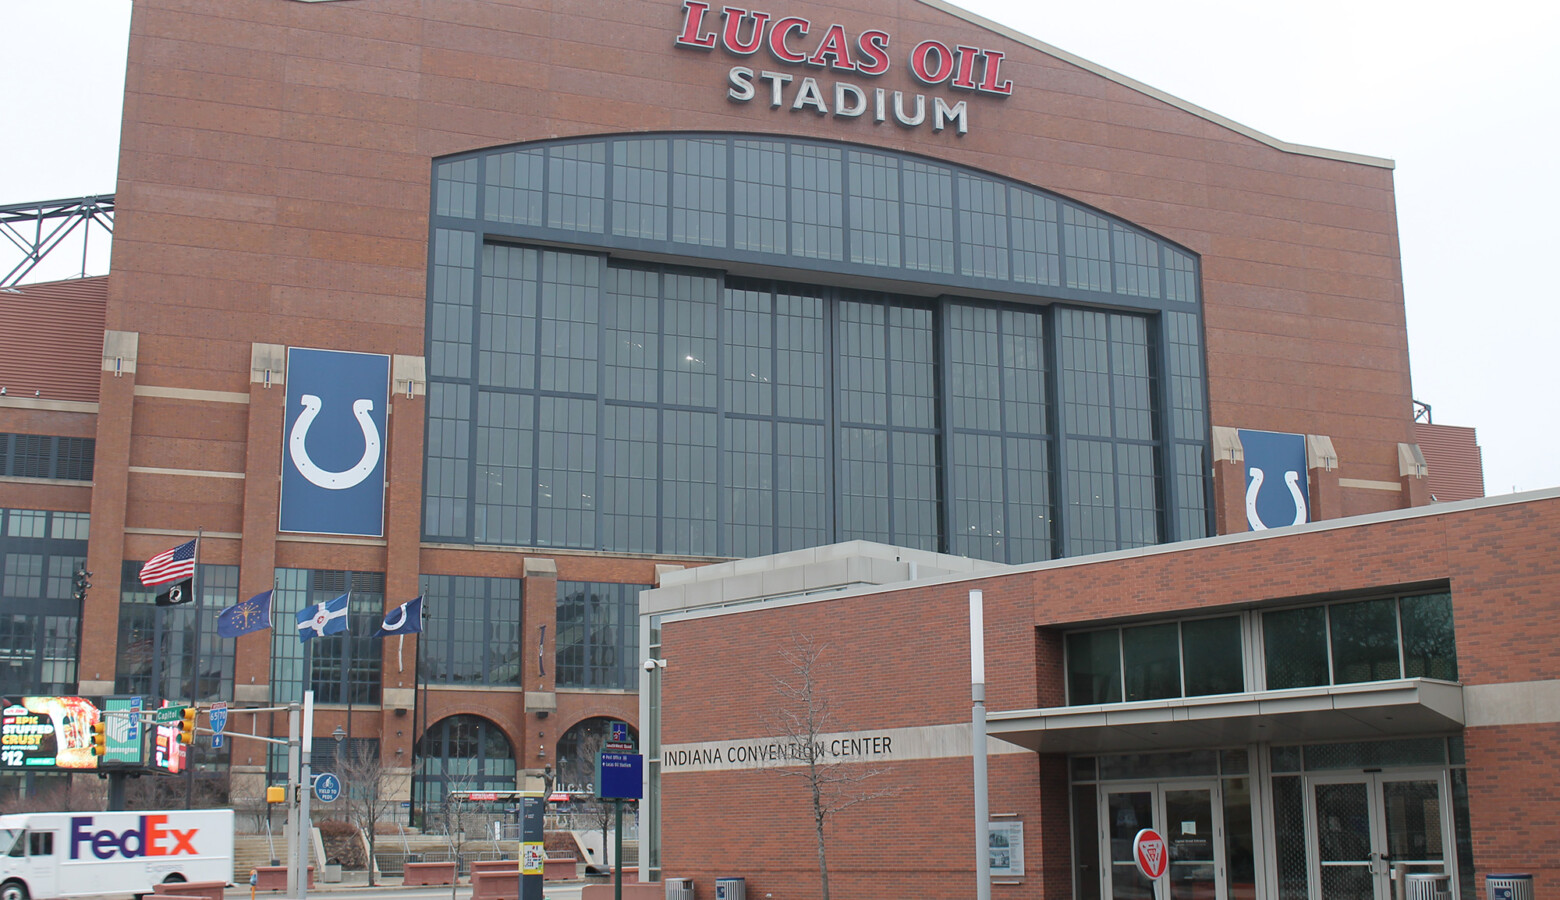 Lucas Oil Stadium is one of six sites the NCAA is using to host the 2021 Men's Division I Basketball Championship. The venue could have up to 17,500 people at a game based on the capacity limits. (Lauren Chapman/IPB News)